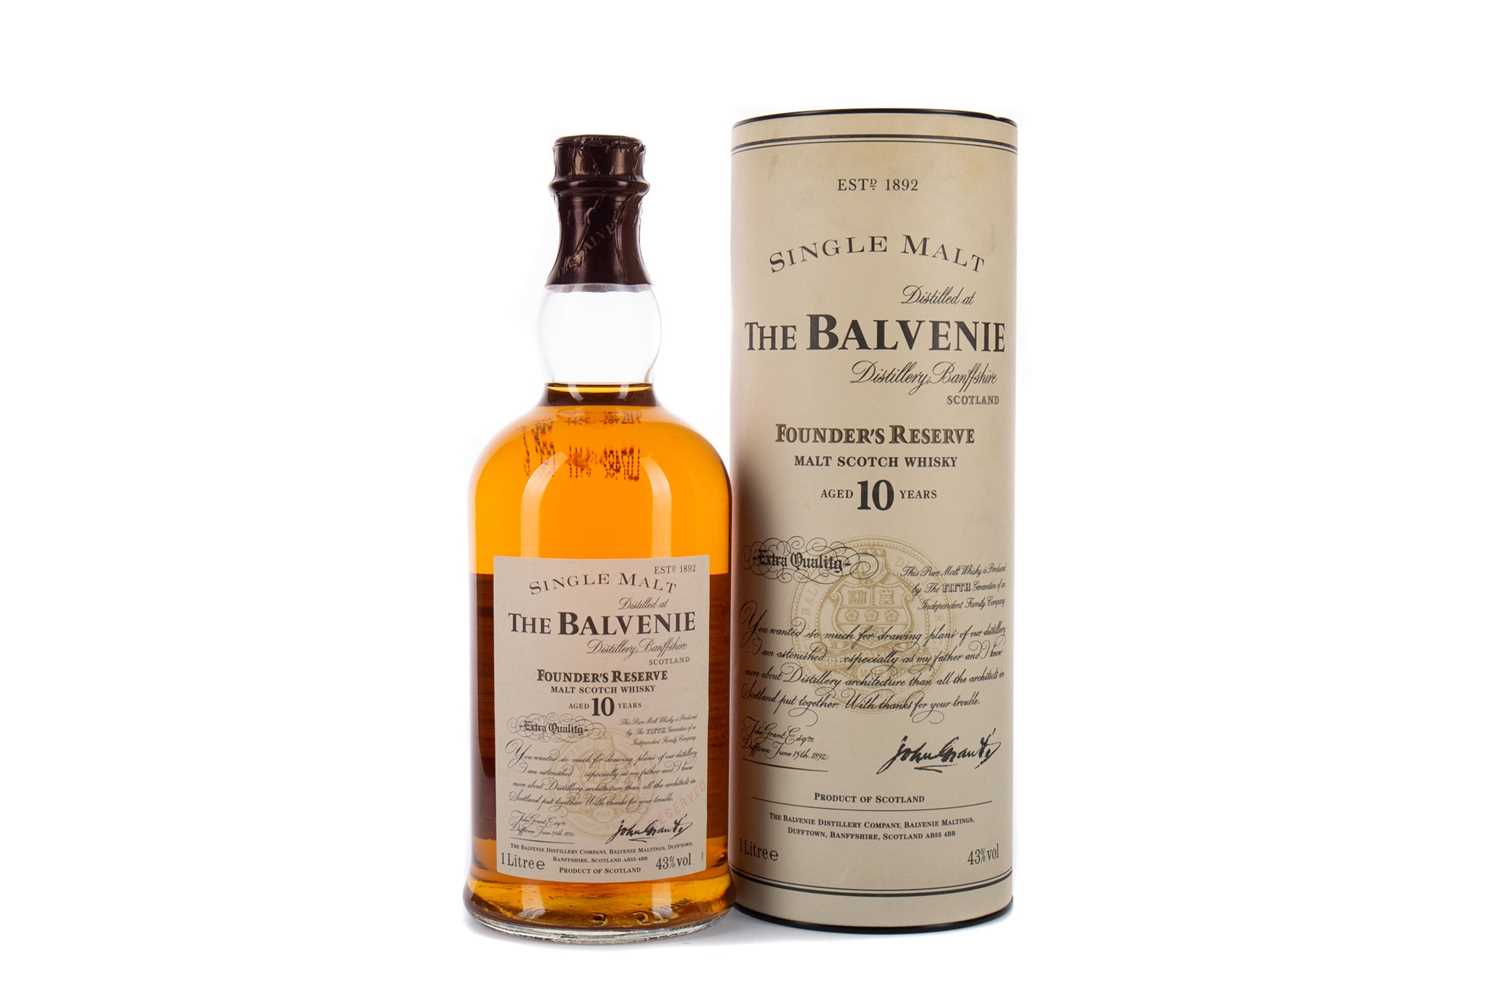 Lot 80 - BALVENIE FOUNDER'S RESERVE AGED 10 YEARS - ONE LITRE